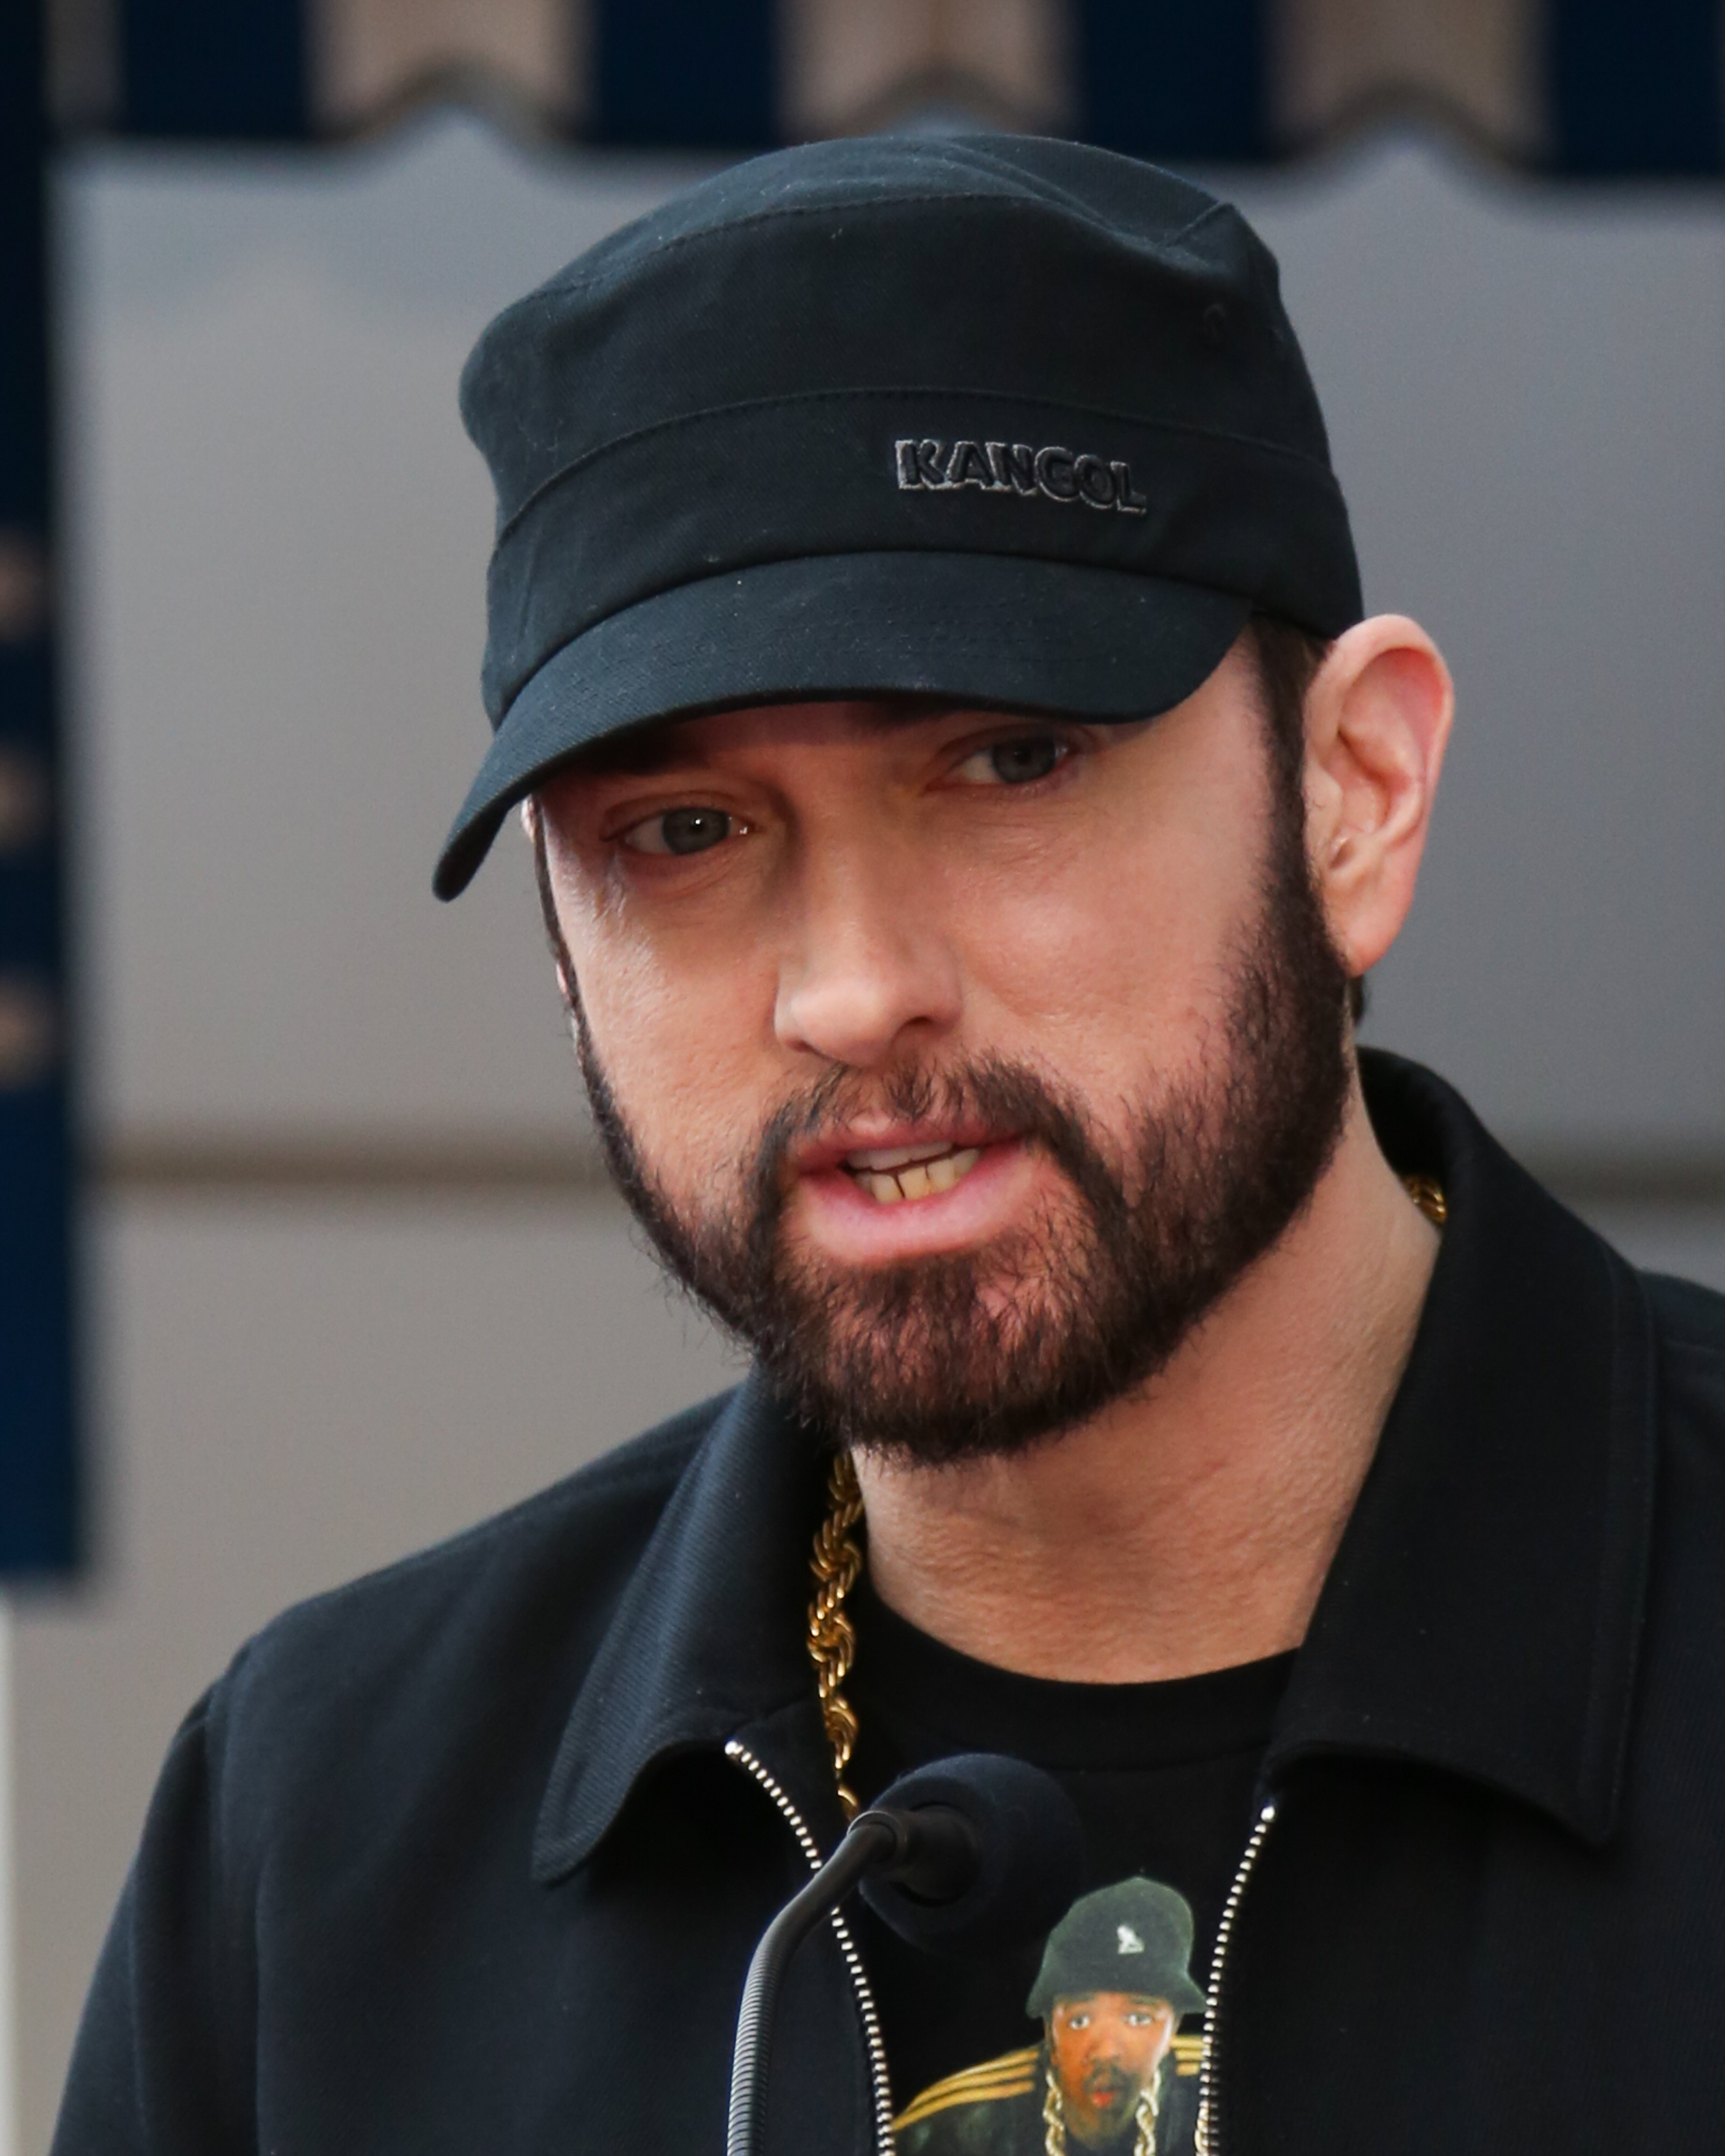 Eminem at a ceremony honoring Curtis "50 Cent" Jackson with a star on the Hollywood Walk of Fame on January 30, 2020 in Hollywood, California. | Source: Getty Images